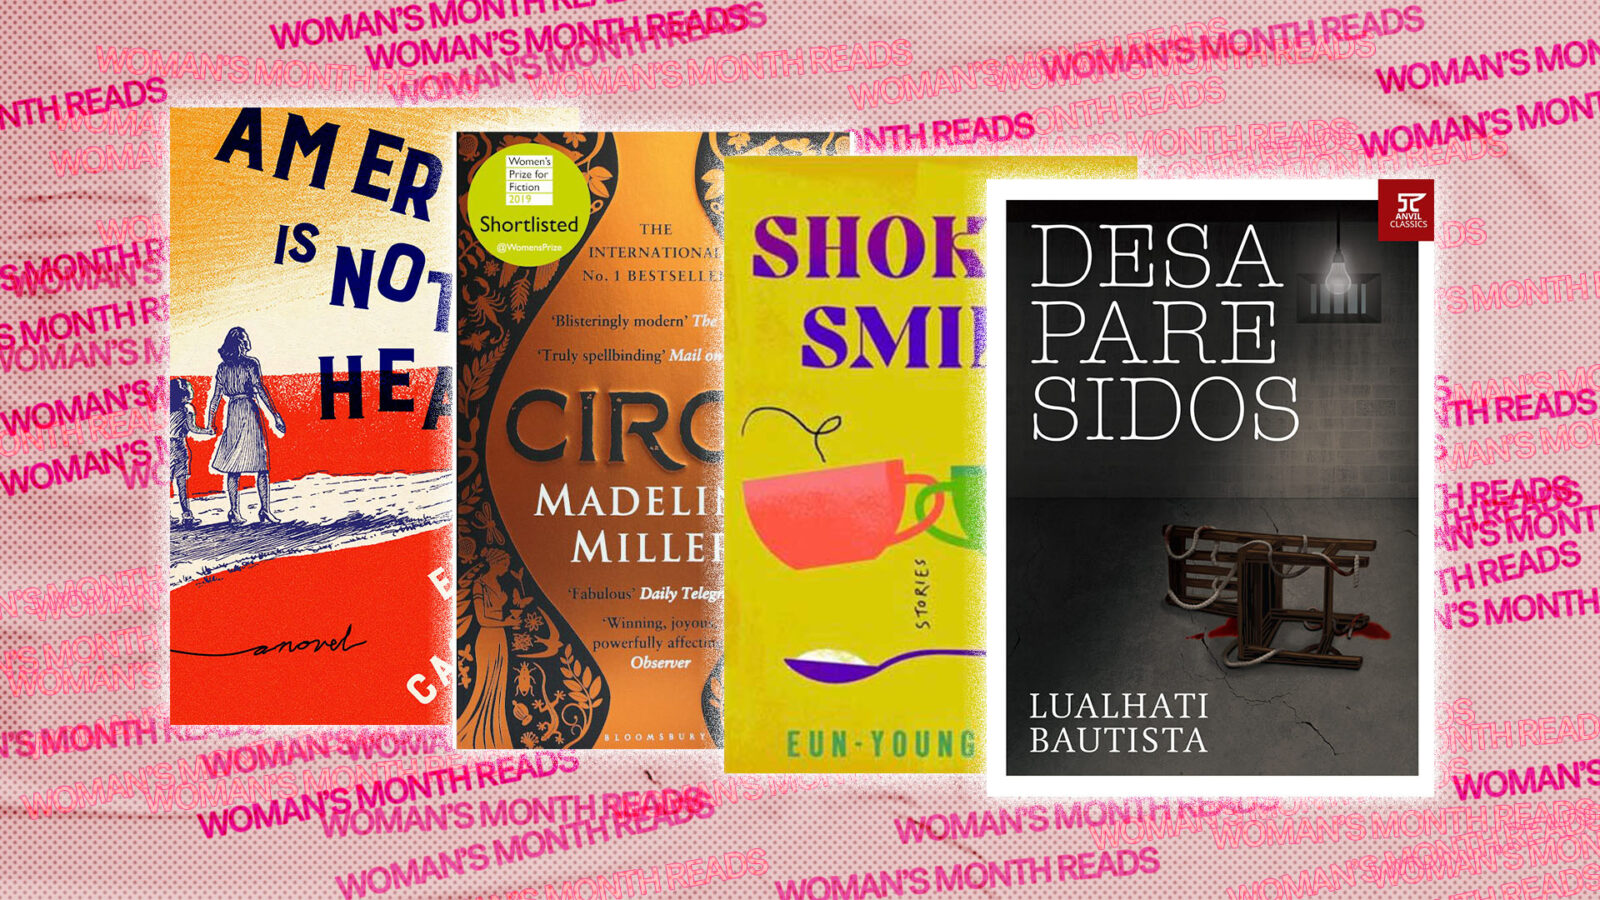 7 Books By Women For Women You Should Check Out This Women’s Month